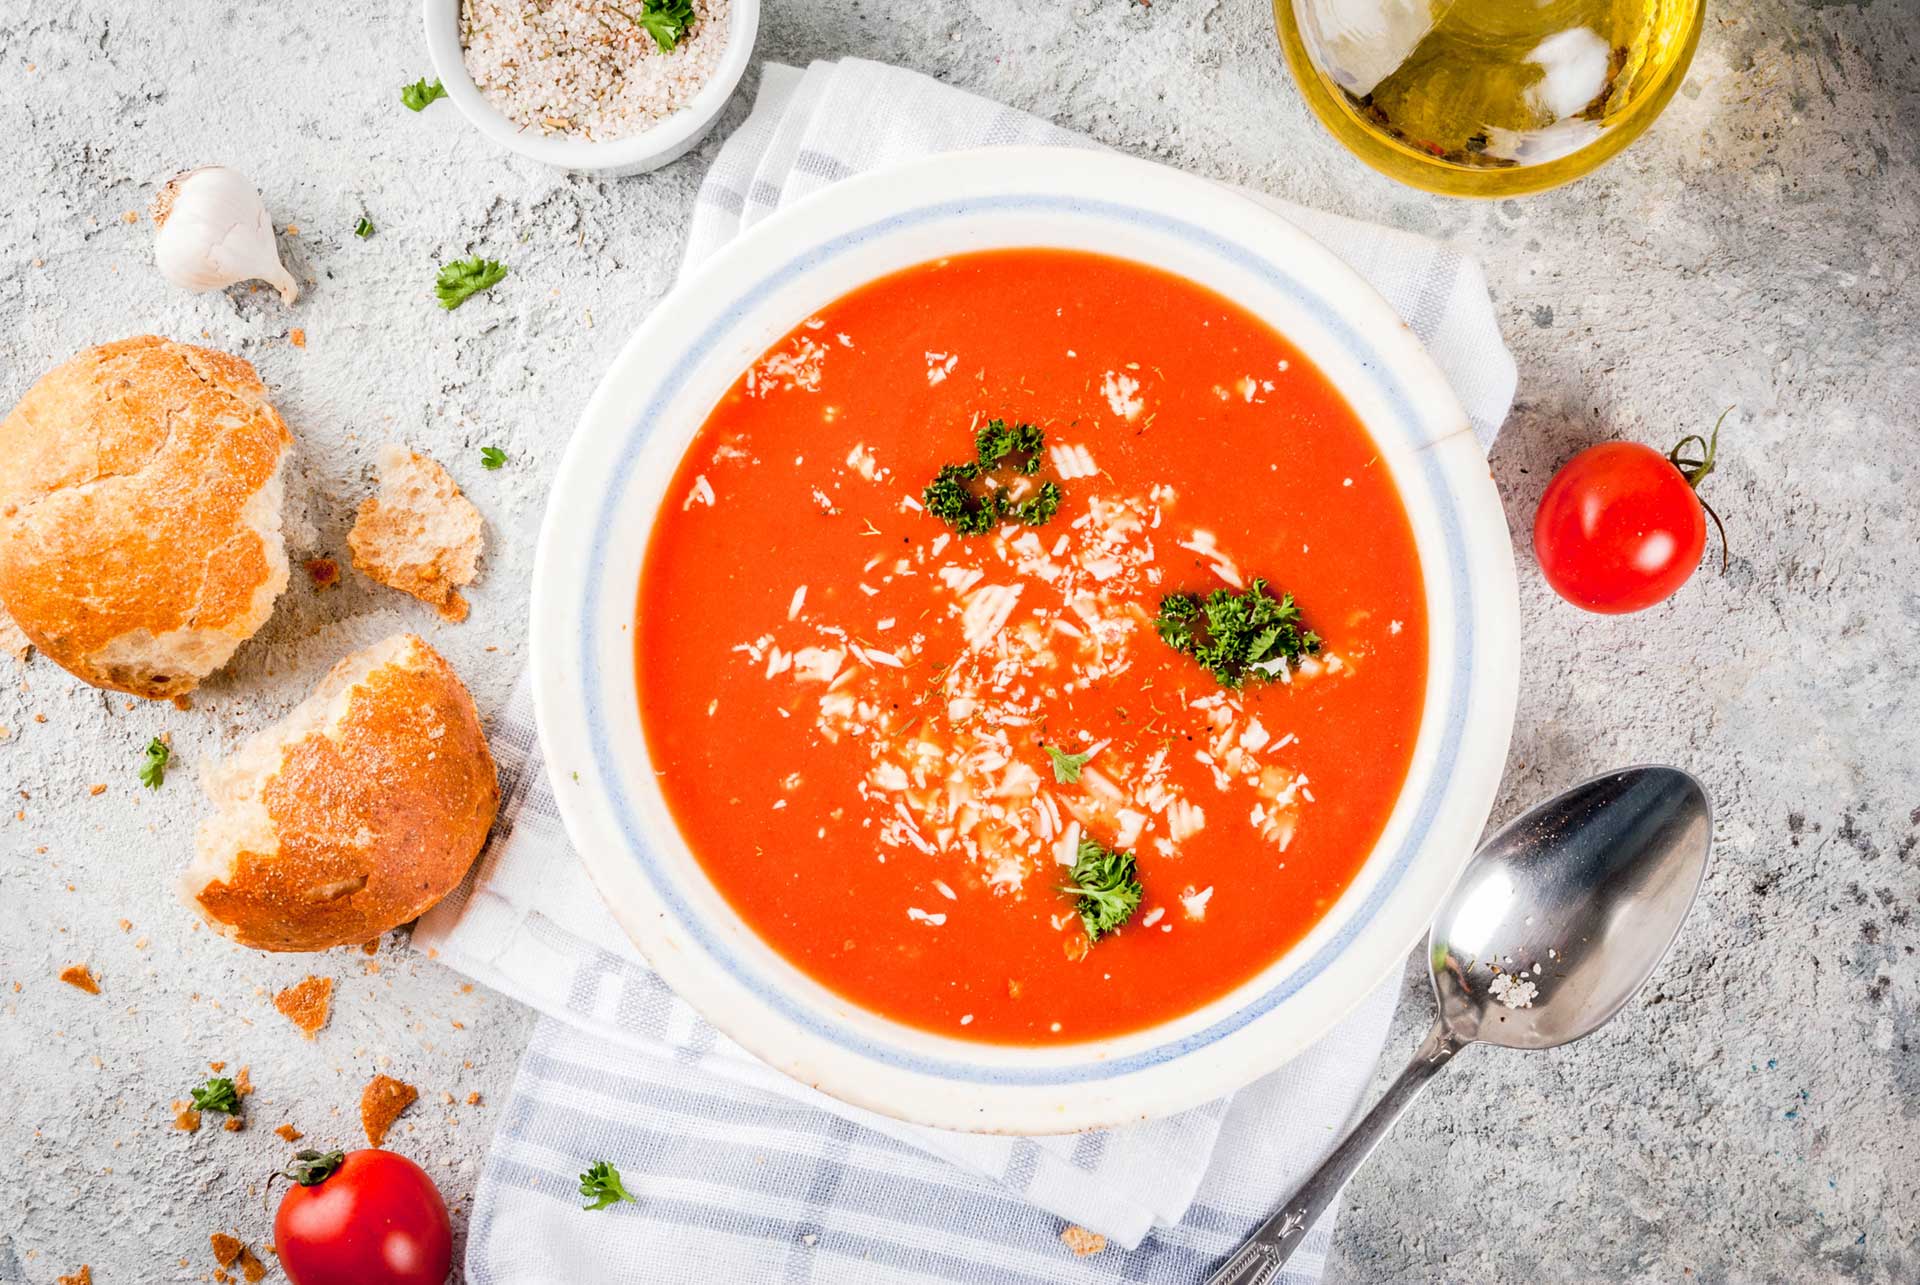 Tomato soup in a white bowl on a tea towel surrounded by tomatoes, bread and seasoning